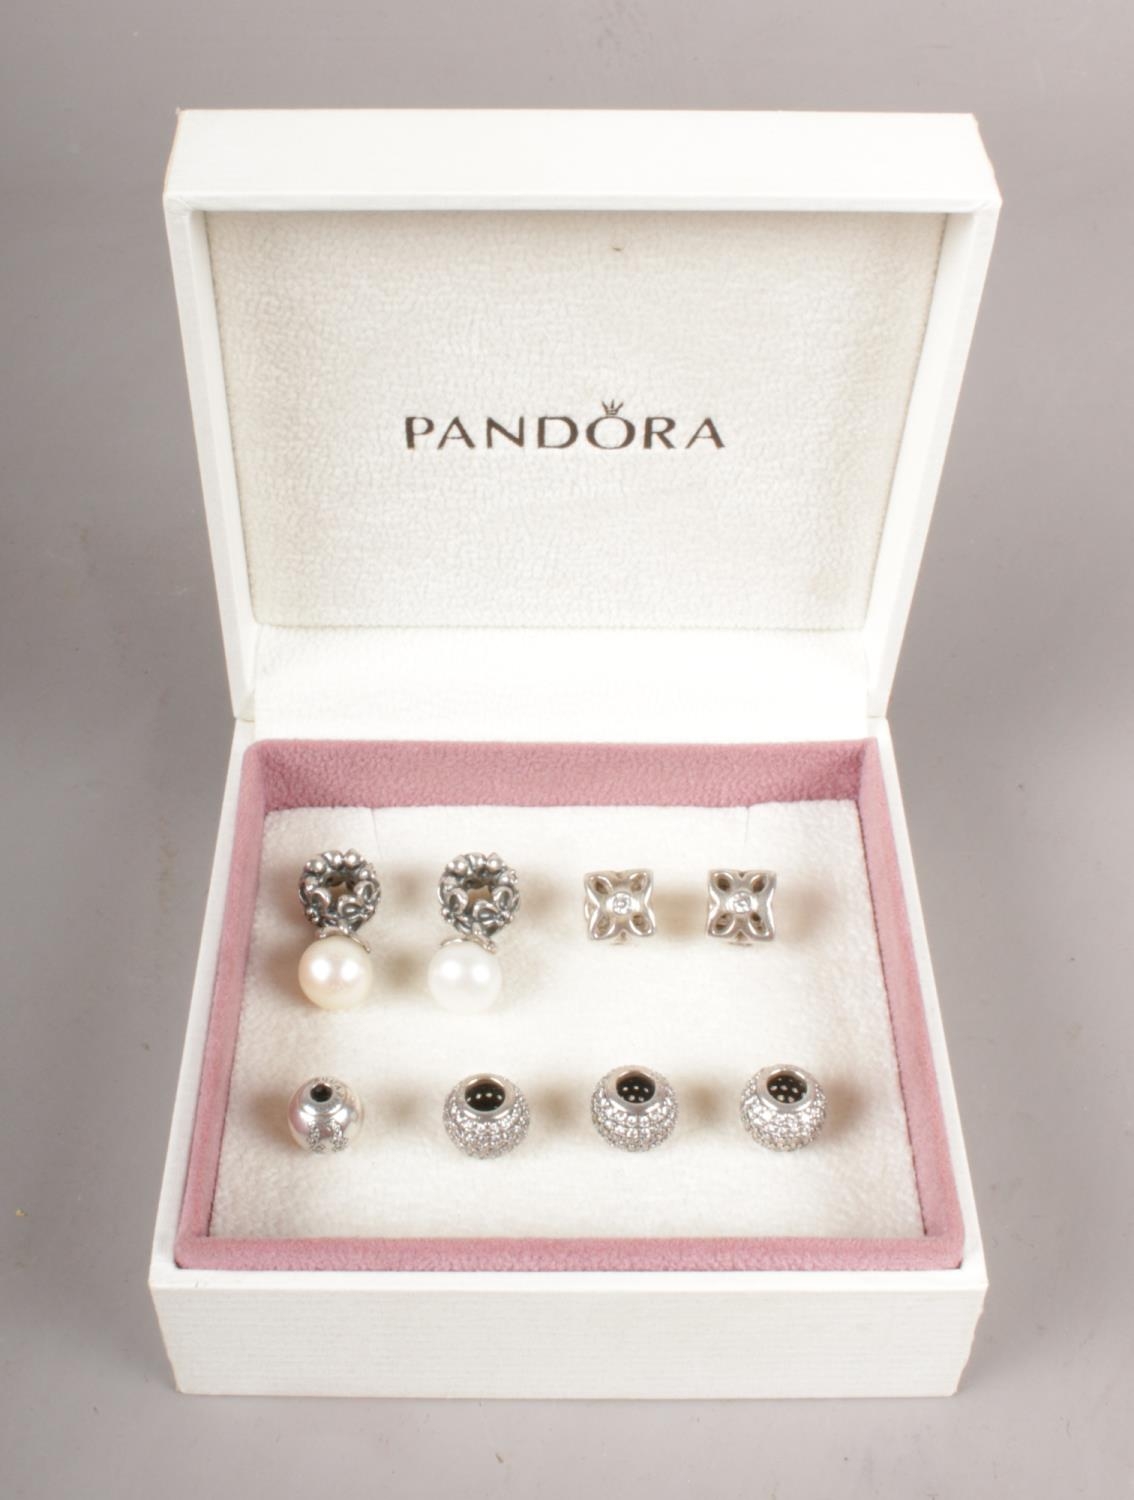 Eight Sterling Silver (925) discontinued Pandora charms in original box.